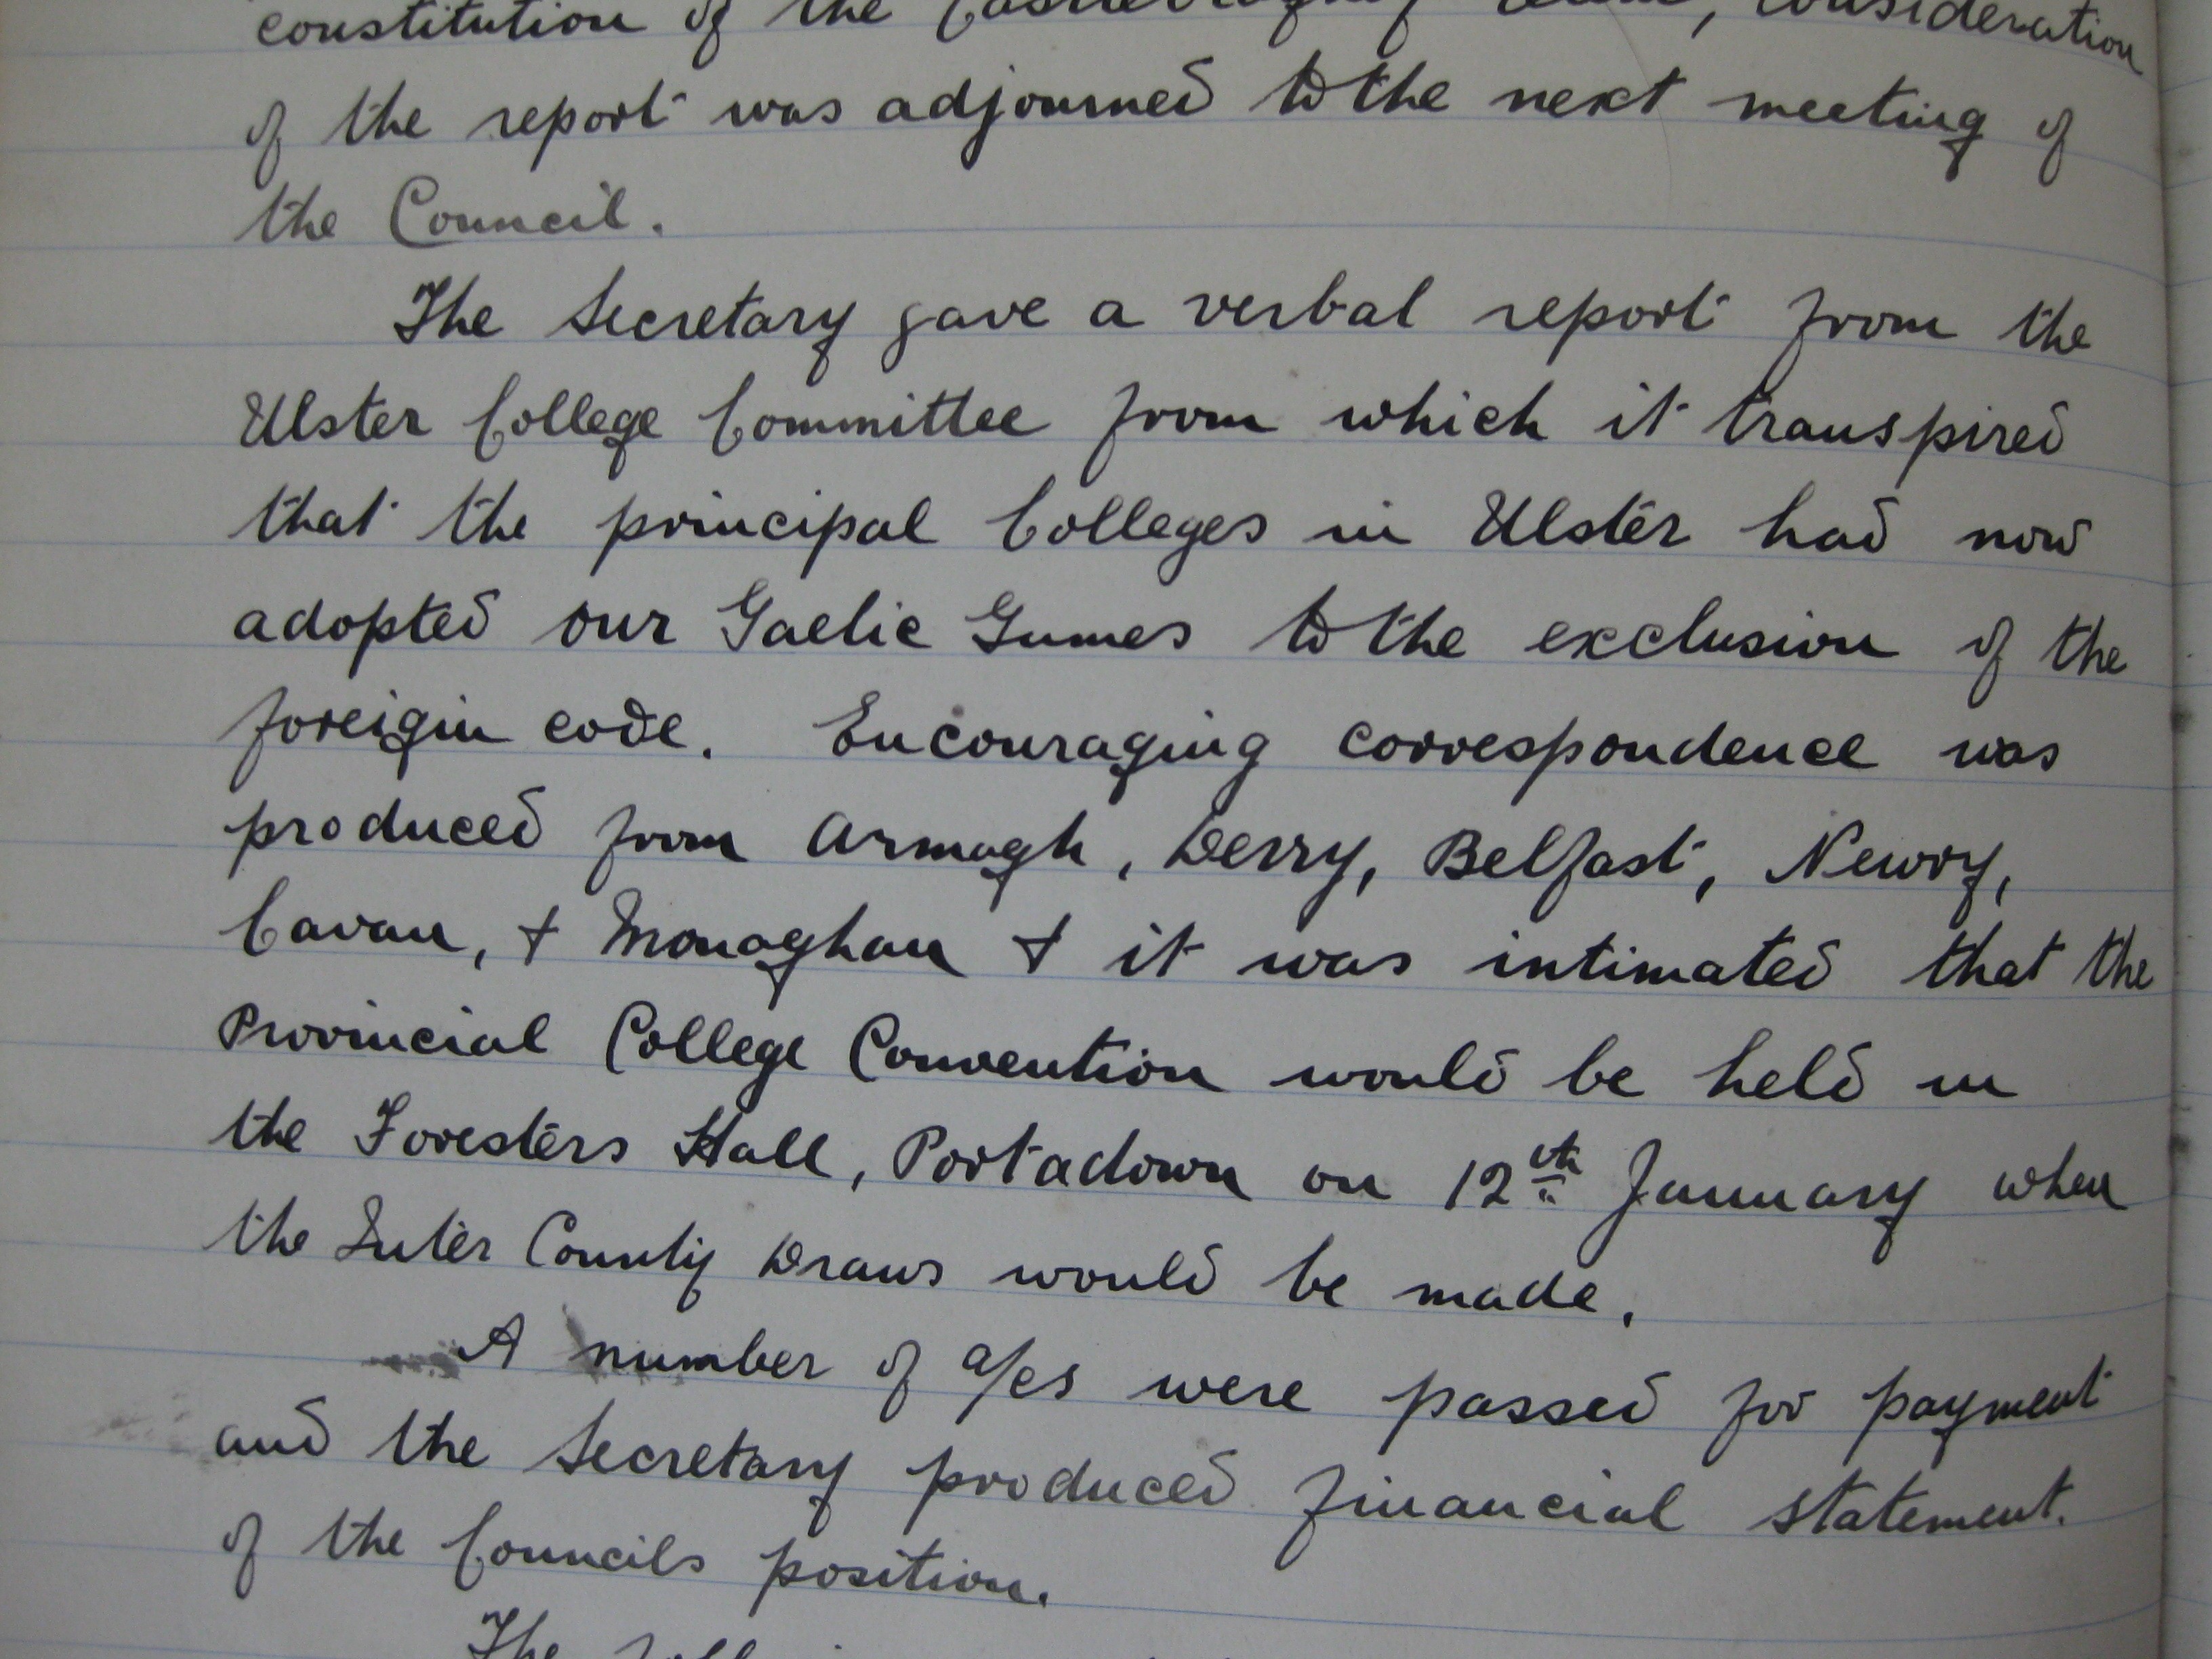 Report to the Ulster Council, November 1917, on the state of Gaelic games in Ulster Colleges. The report states that the majority of colleges had adopted 'Gaelic games to the exclusion of the foreign code'.